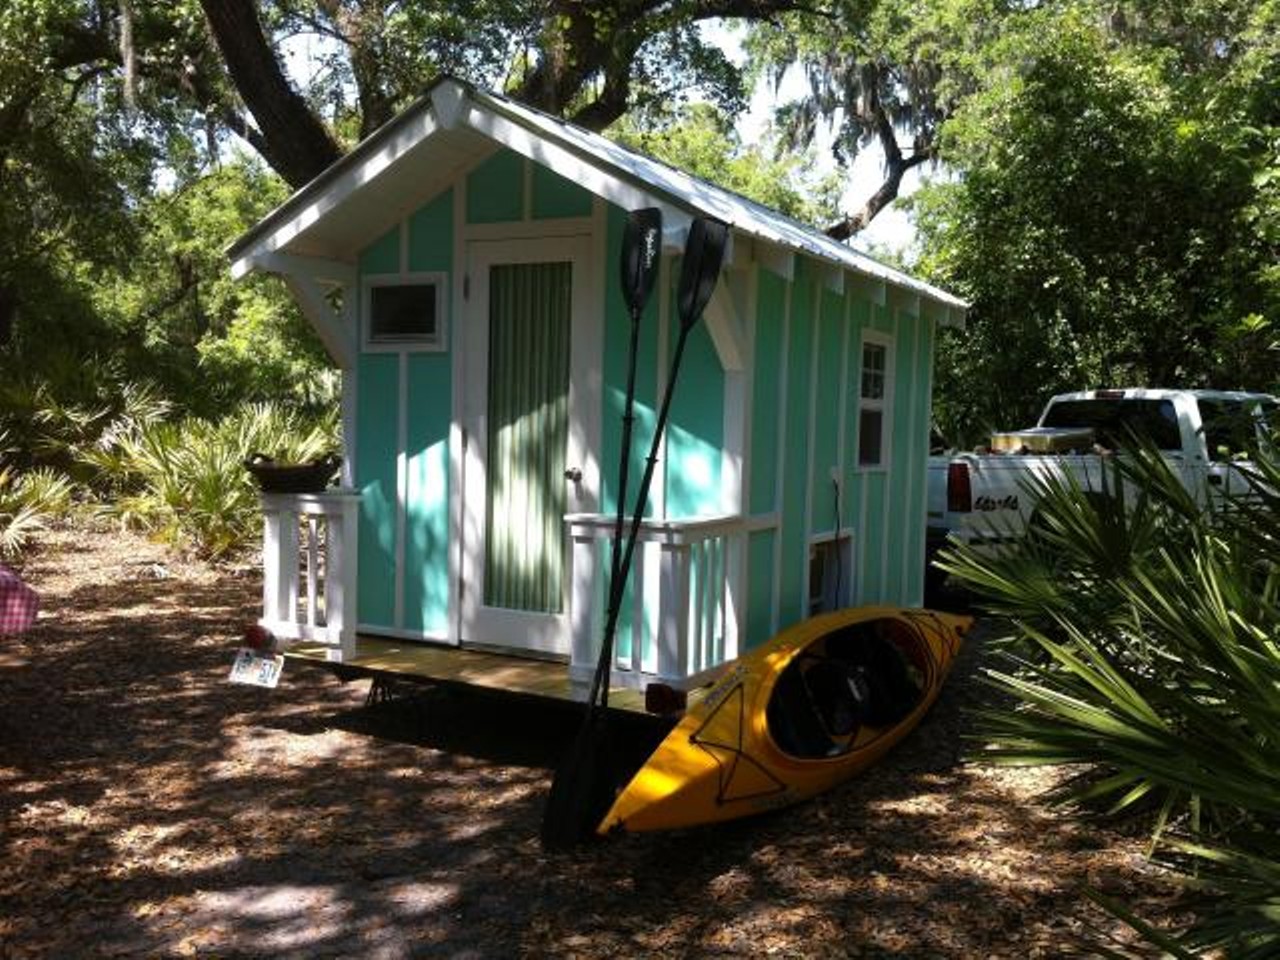 Aqua Tiny House
Location: Eustis
Price: $15000
Size: 70 sq ft
Look at the banister on the front porch!